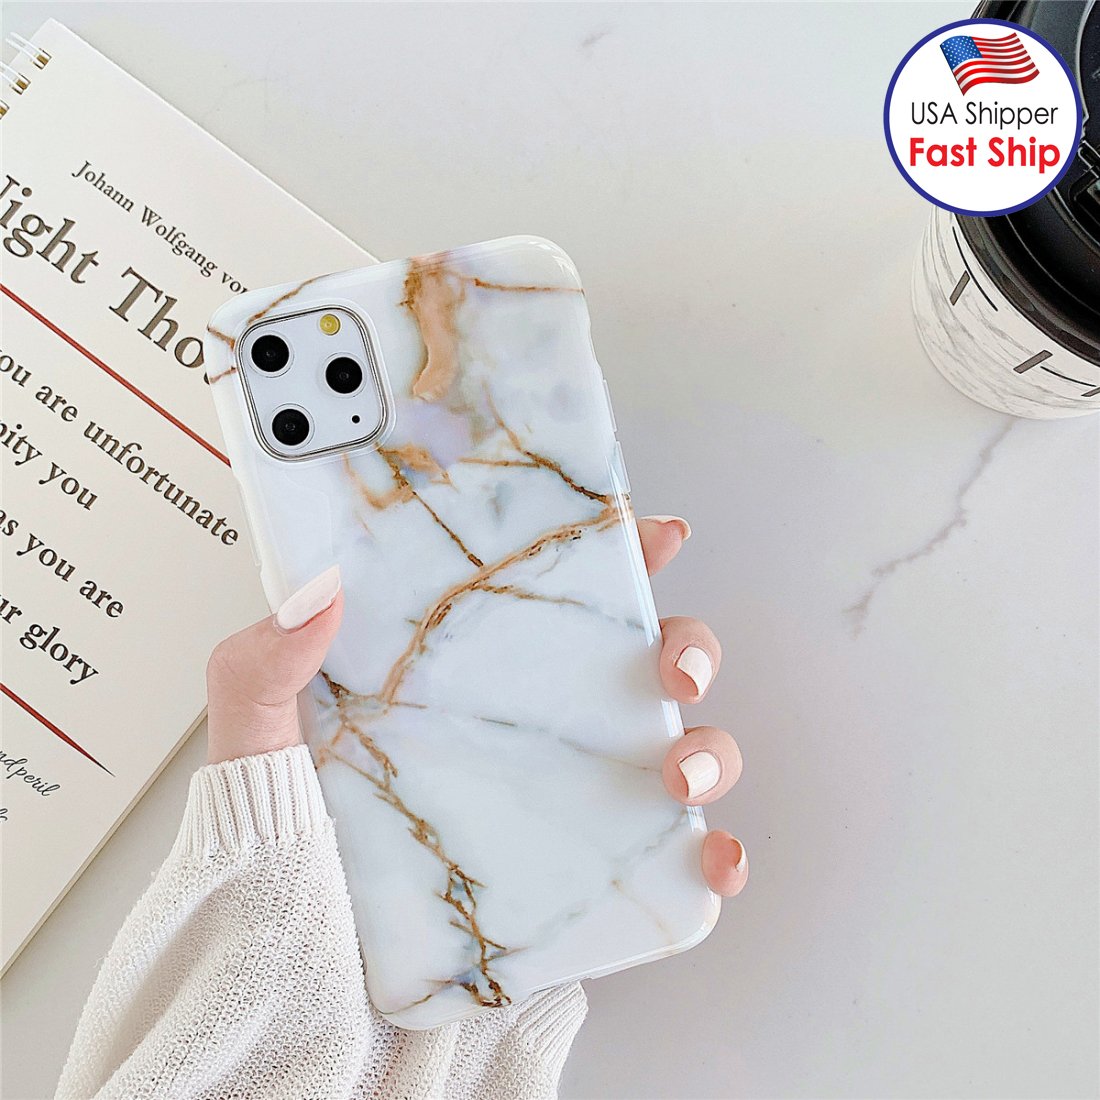 AMZER Marble Design Case for iPhone 11 Pro Slim IMD TPU Protective Case with HD Designs - White Gold - image 2 of 4